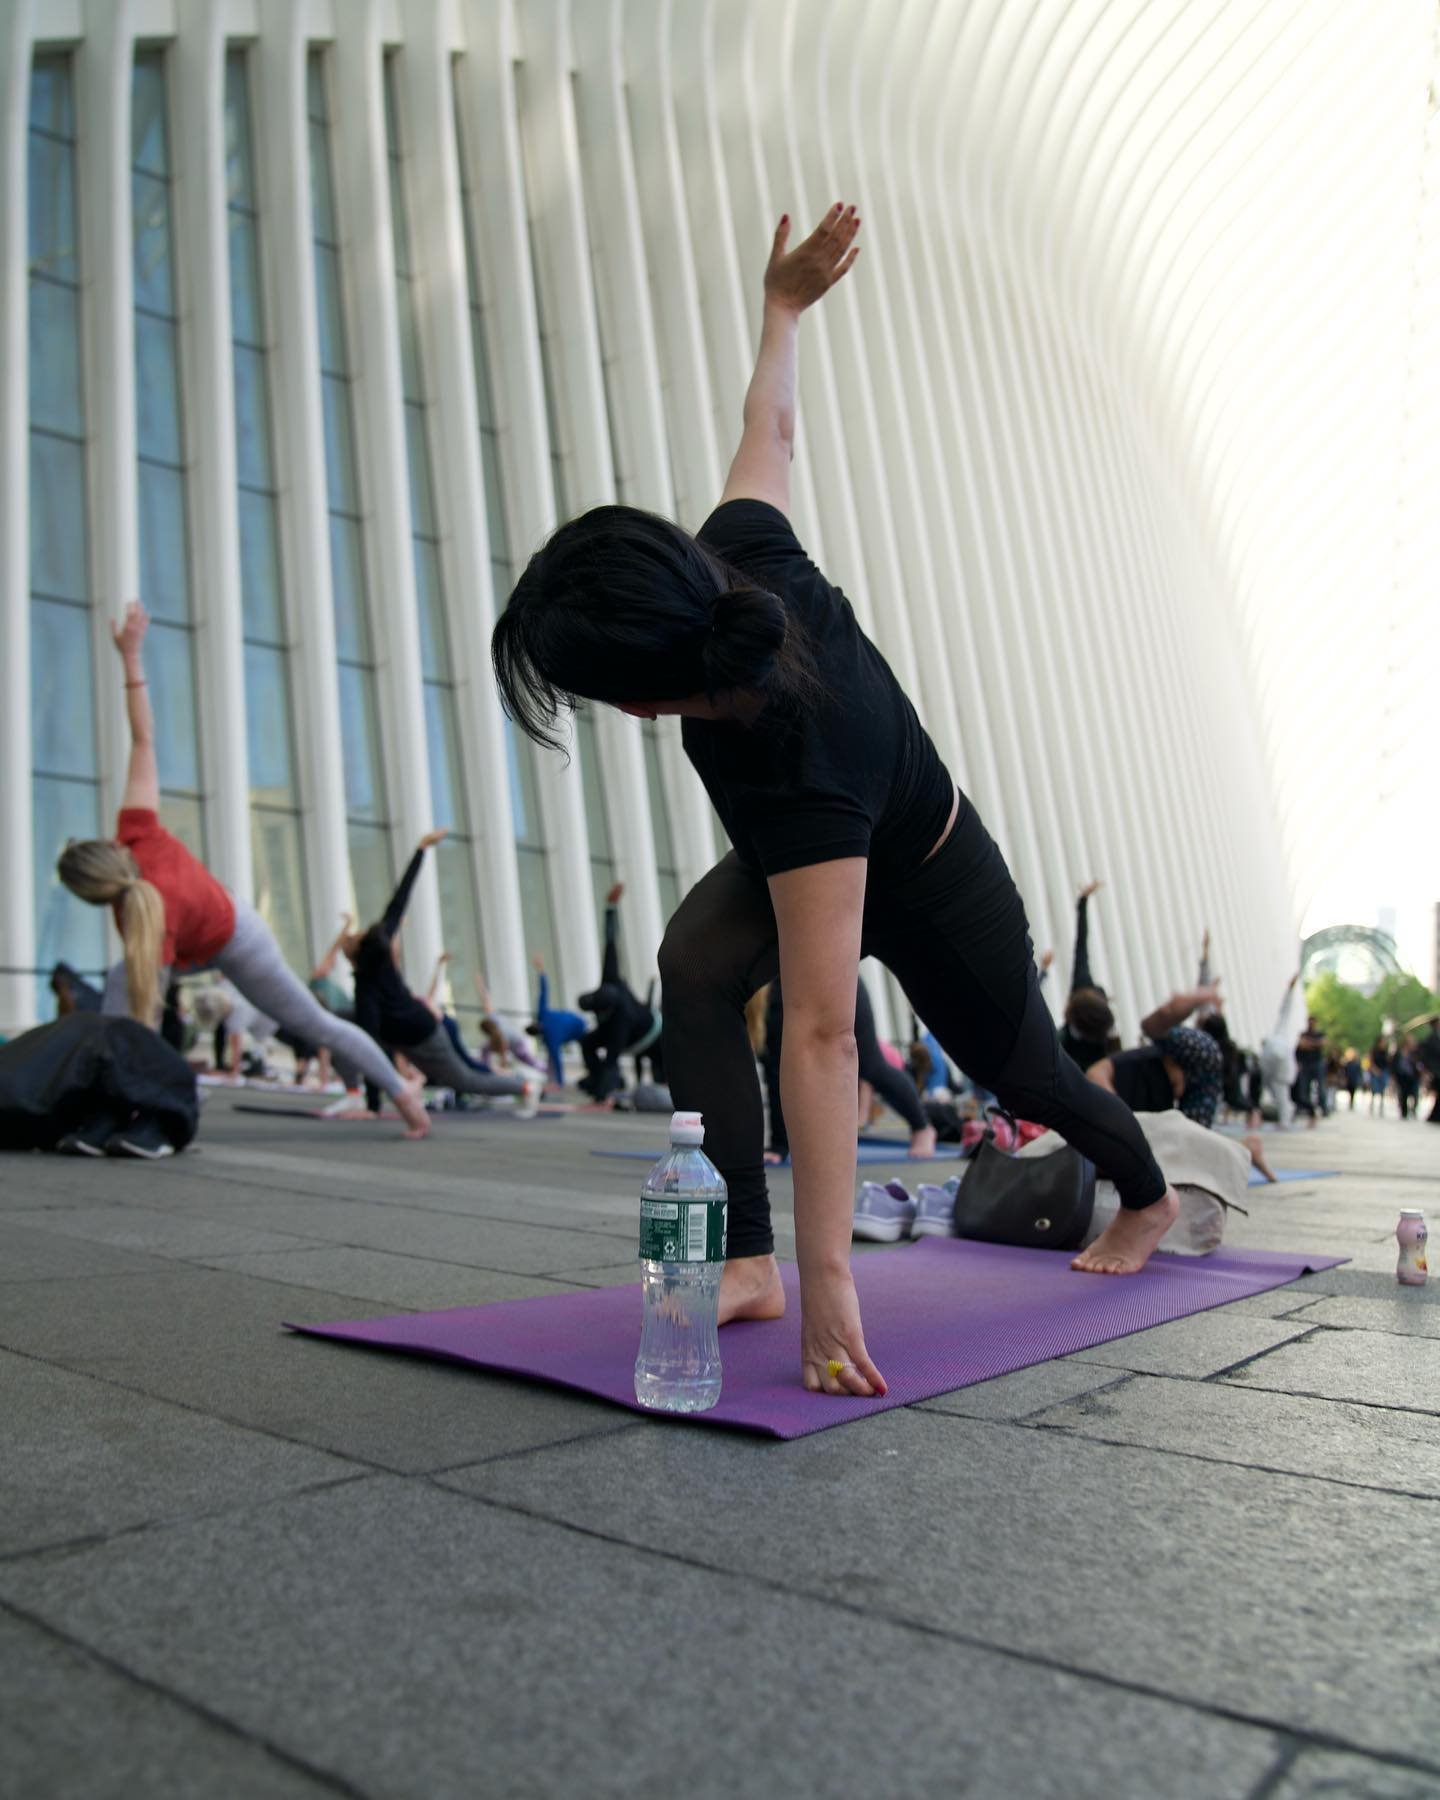 Wellness Wednesdays @_wtcofficial is less than 2 weeks away! 
.
Starting May 8th, we will return with a variety of free classes to help bring you to balance all summer long. 
.
Join us most Wednesdays 5:30-6:30pm outside the Oculus Plaza through 10/1